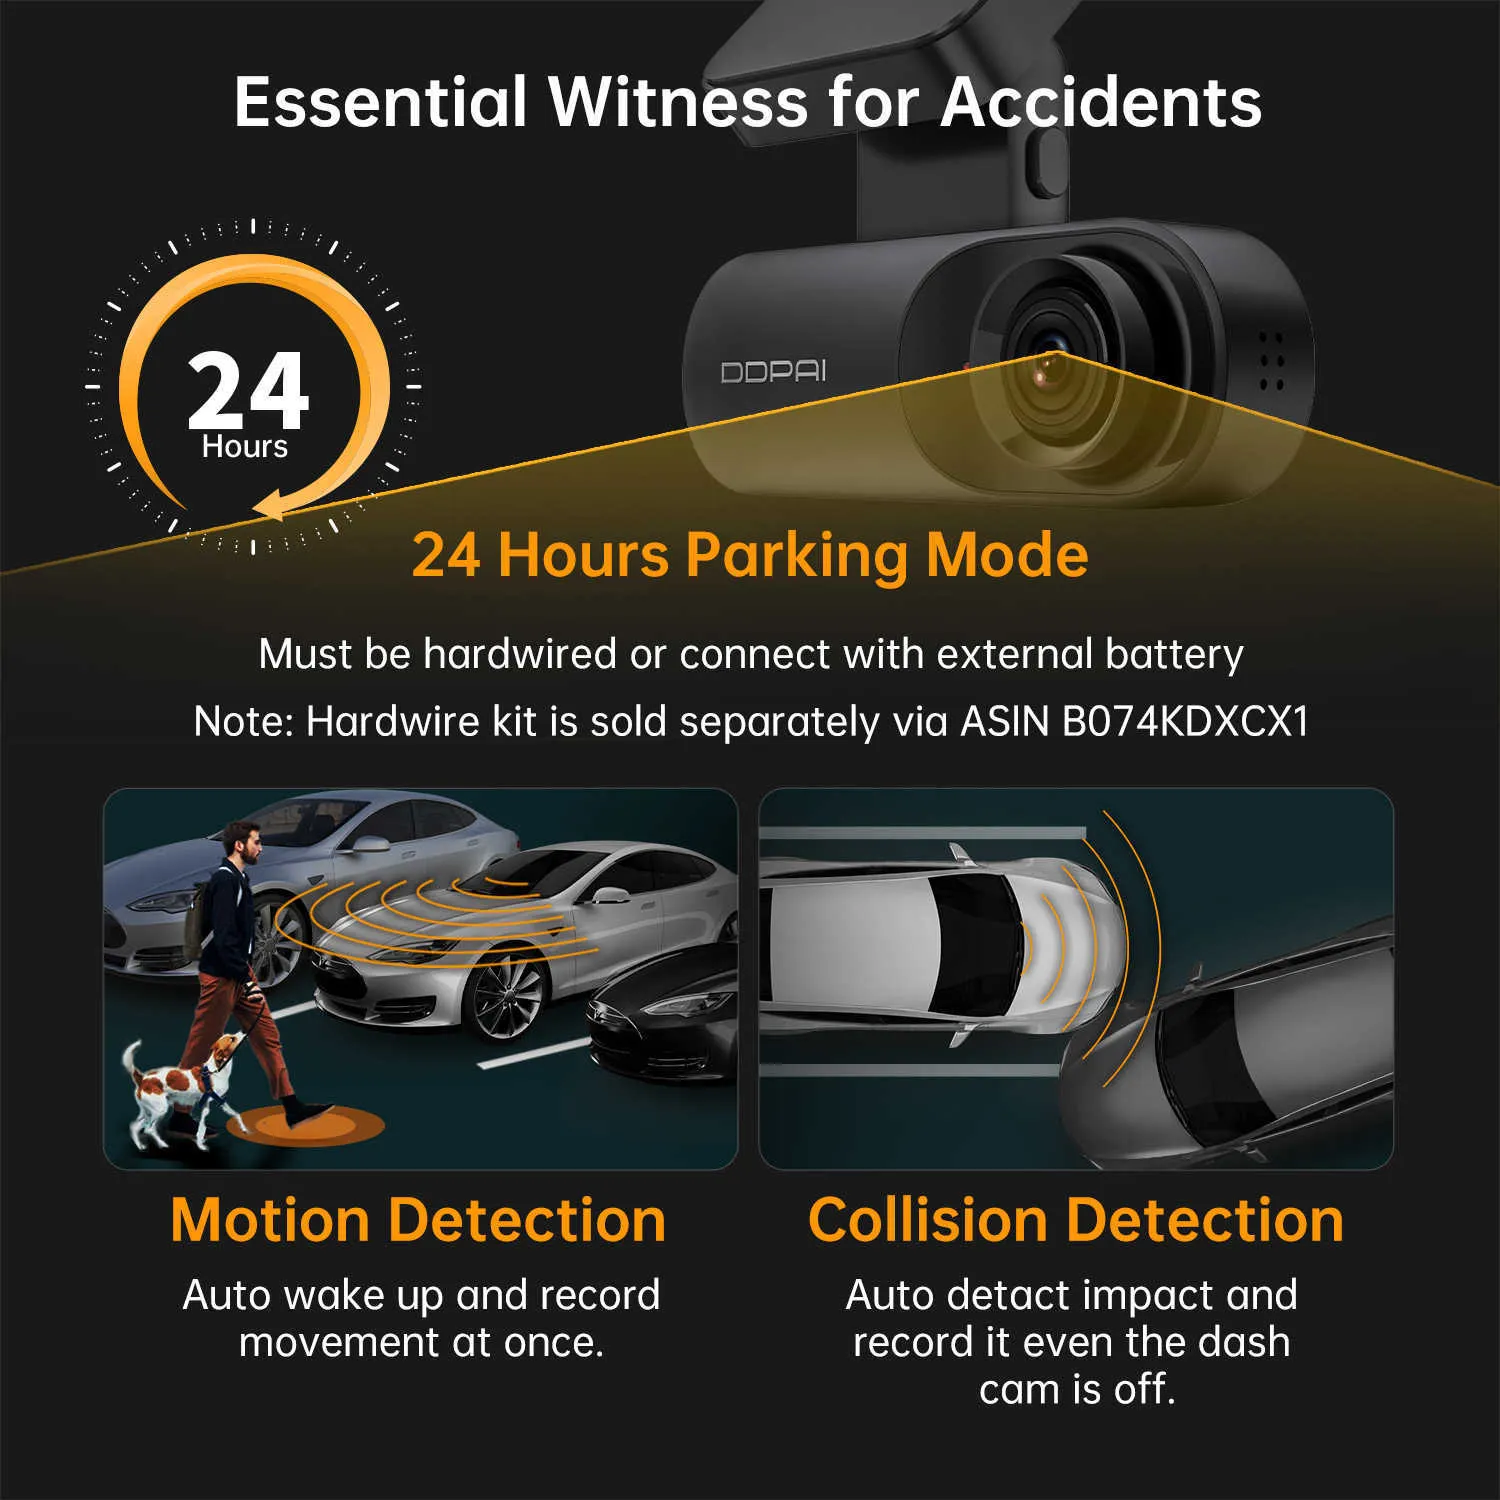 Update DDPAI Dash Cam Mola N3 1600P HD Vehicle Drive Auto Video DVR 2K  Smart Connect Android Wifi Car Camera Recorder 24H Parking Dashcam Dvr 323  From Xselectronics, $53.81